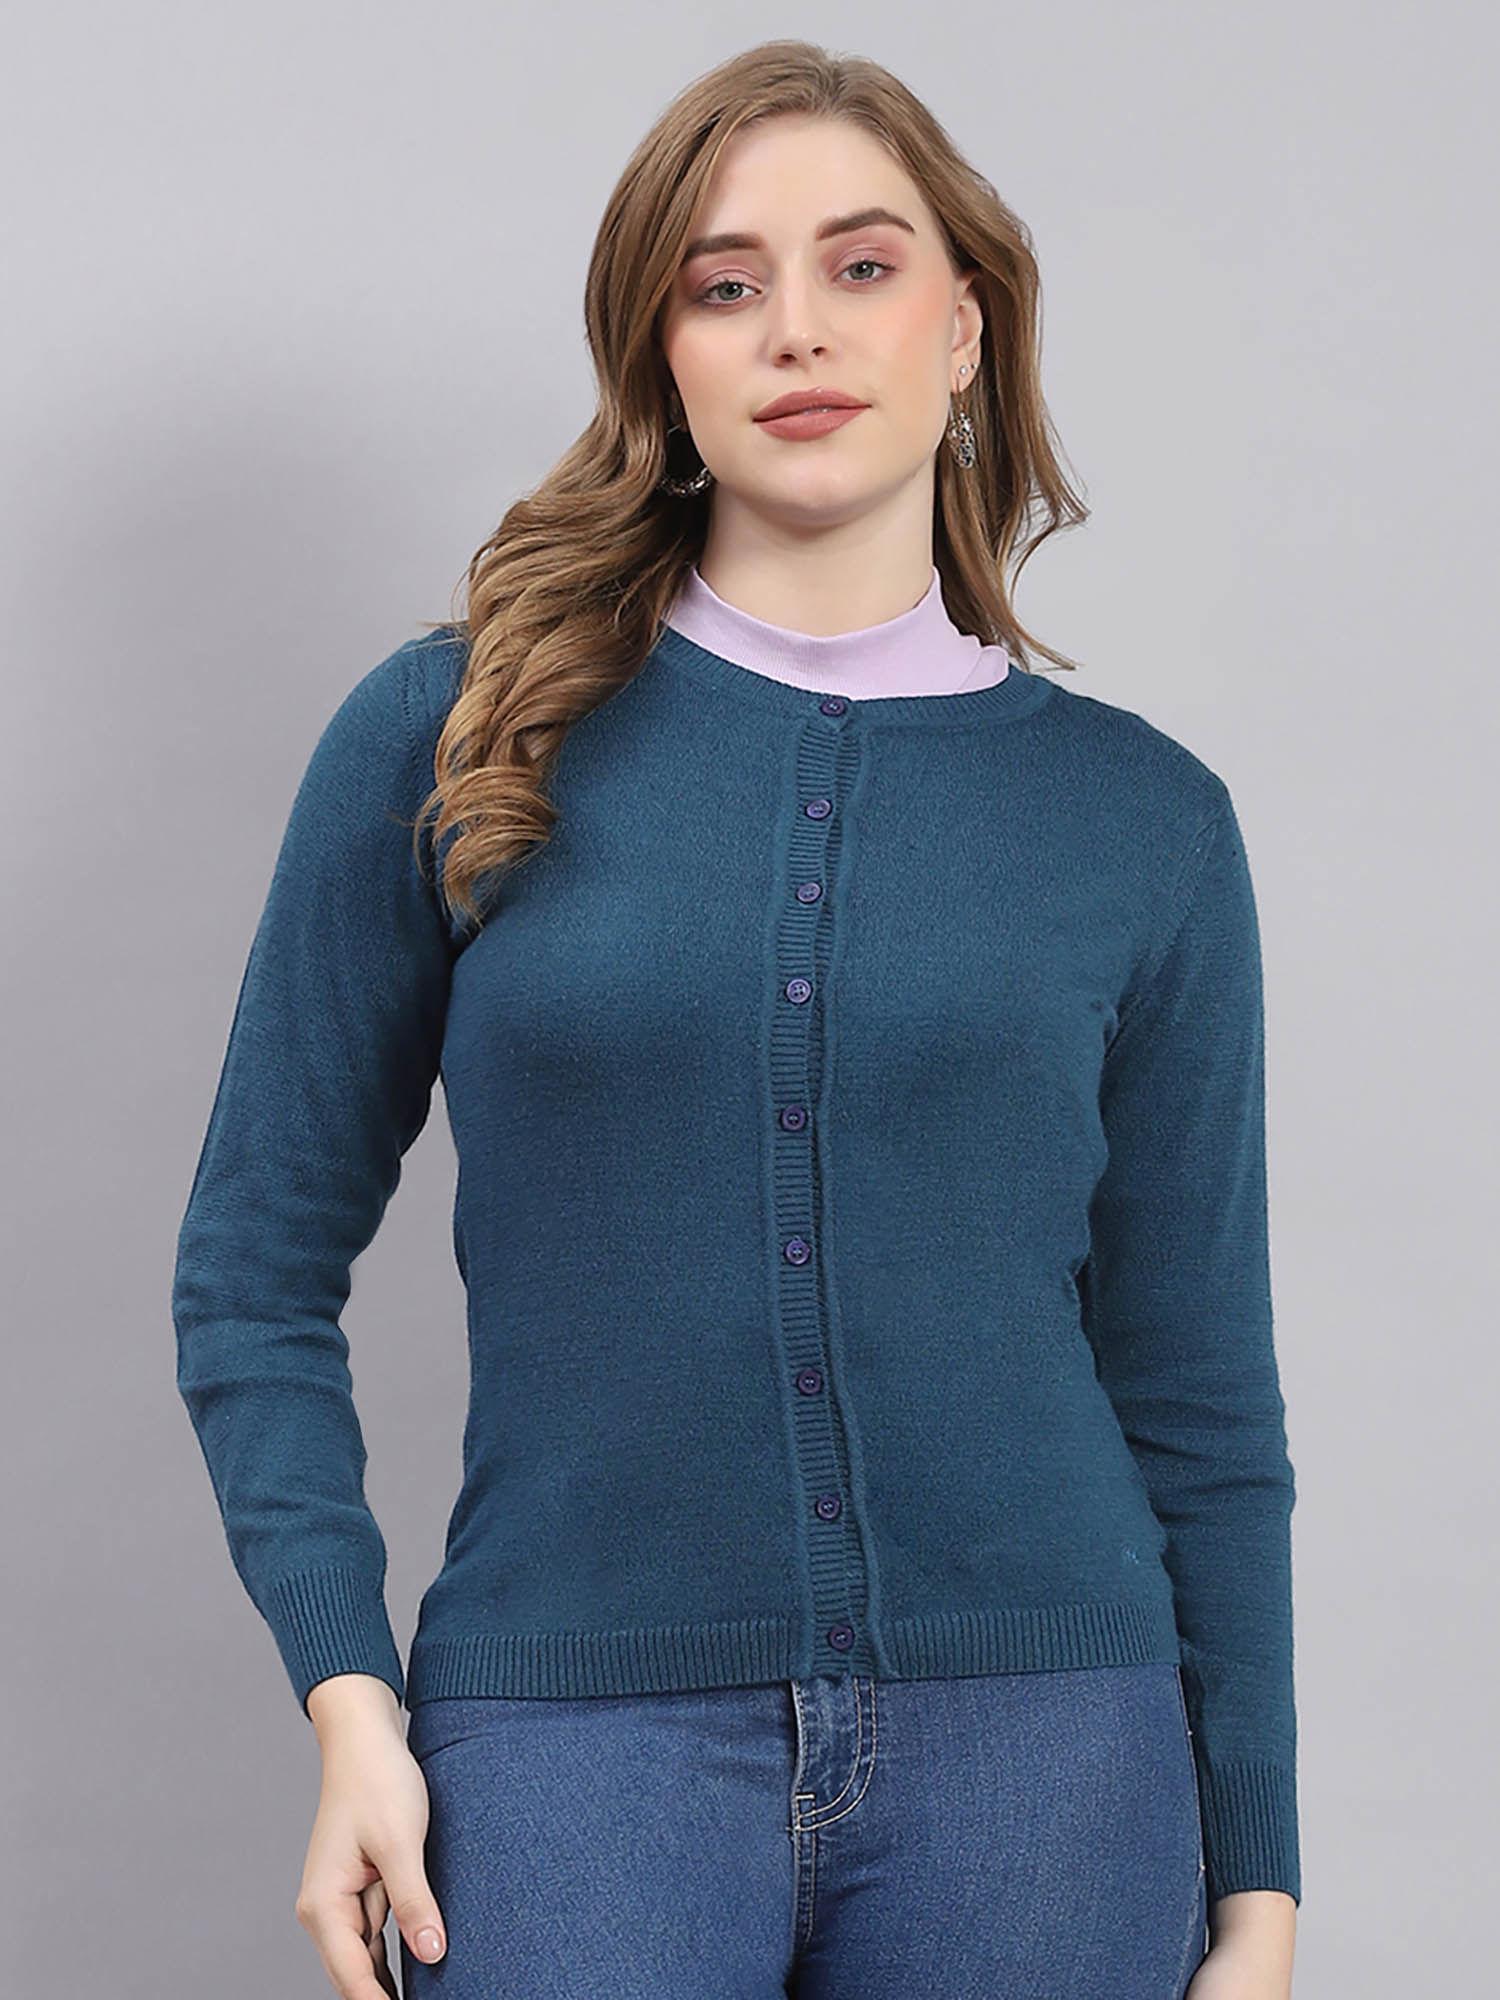 Women Solid Full Sleeves Round Neck Teal Cardigan